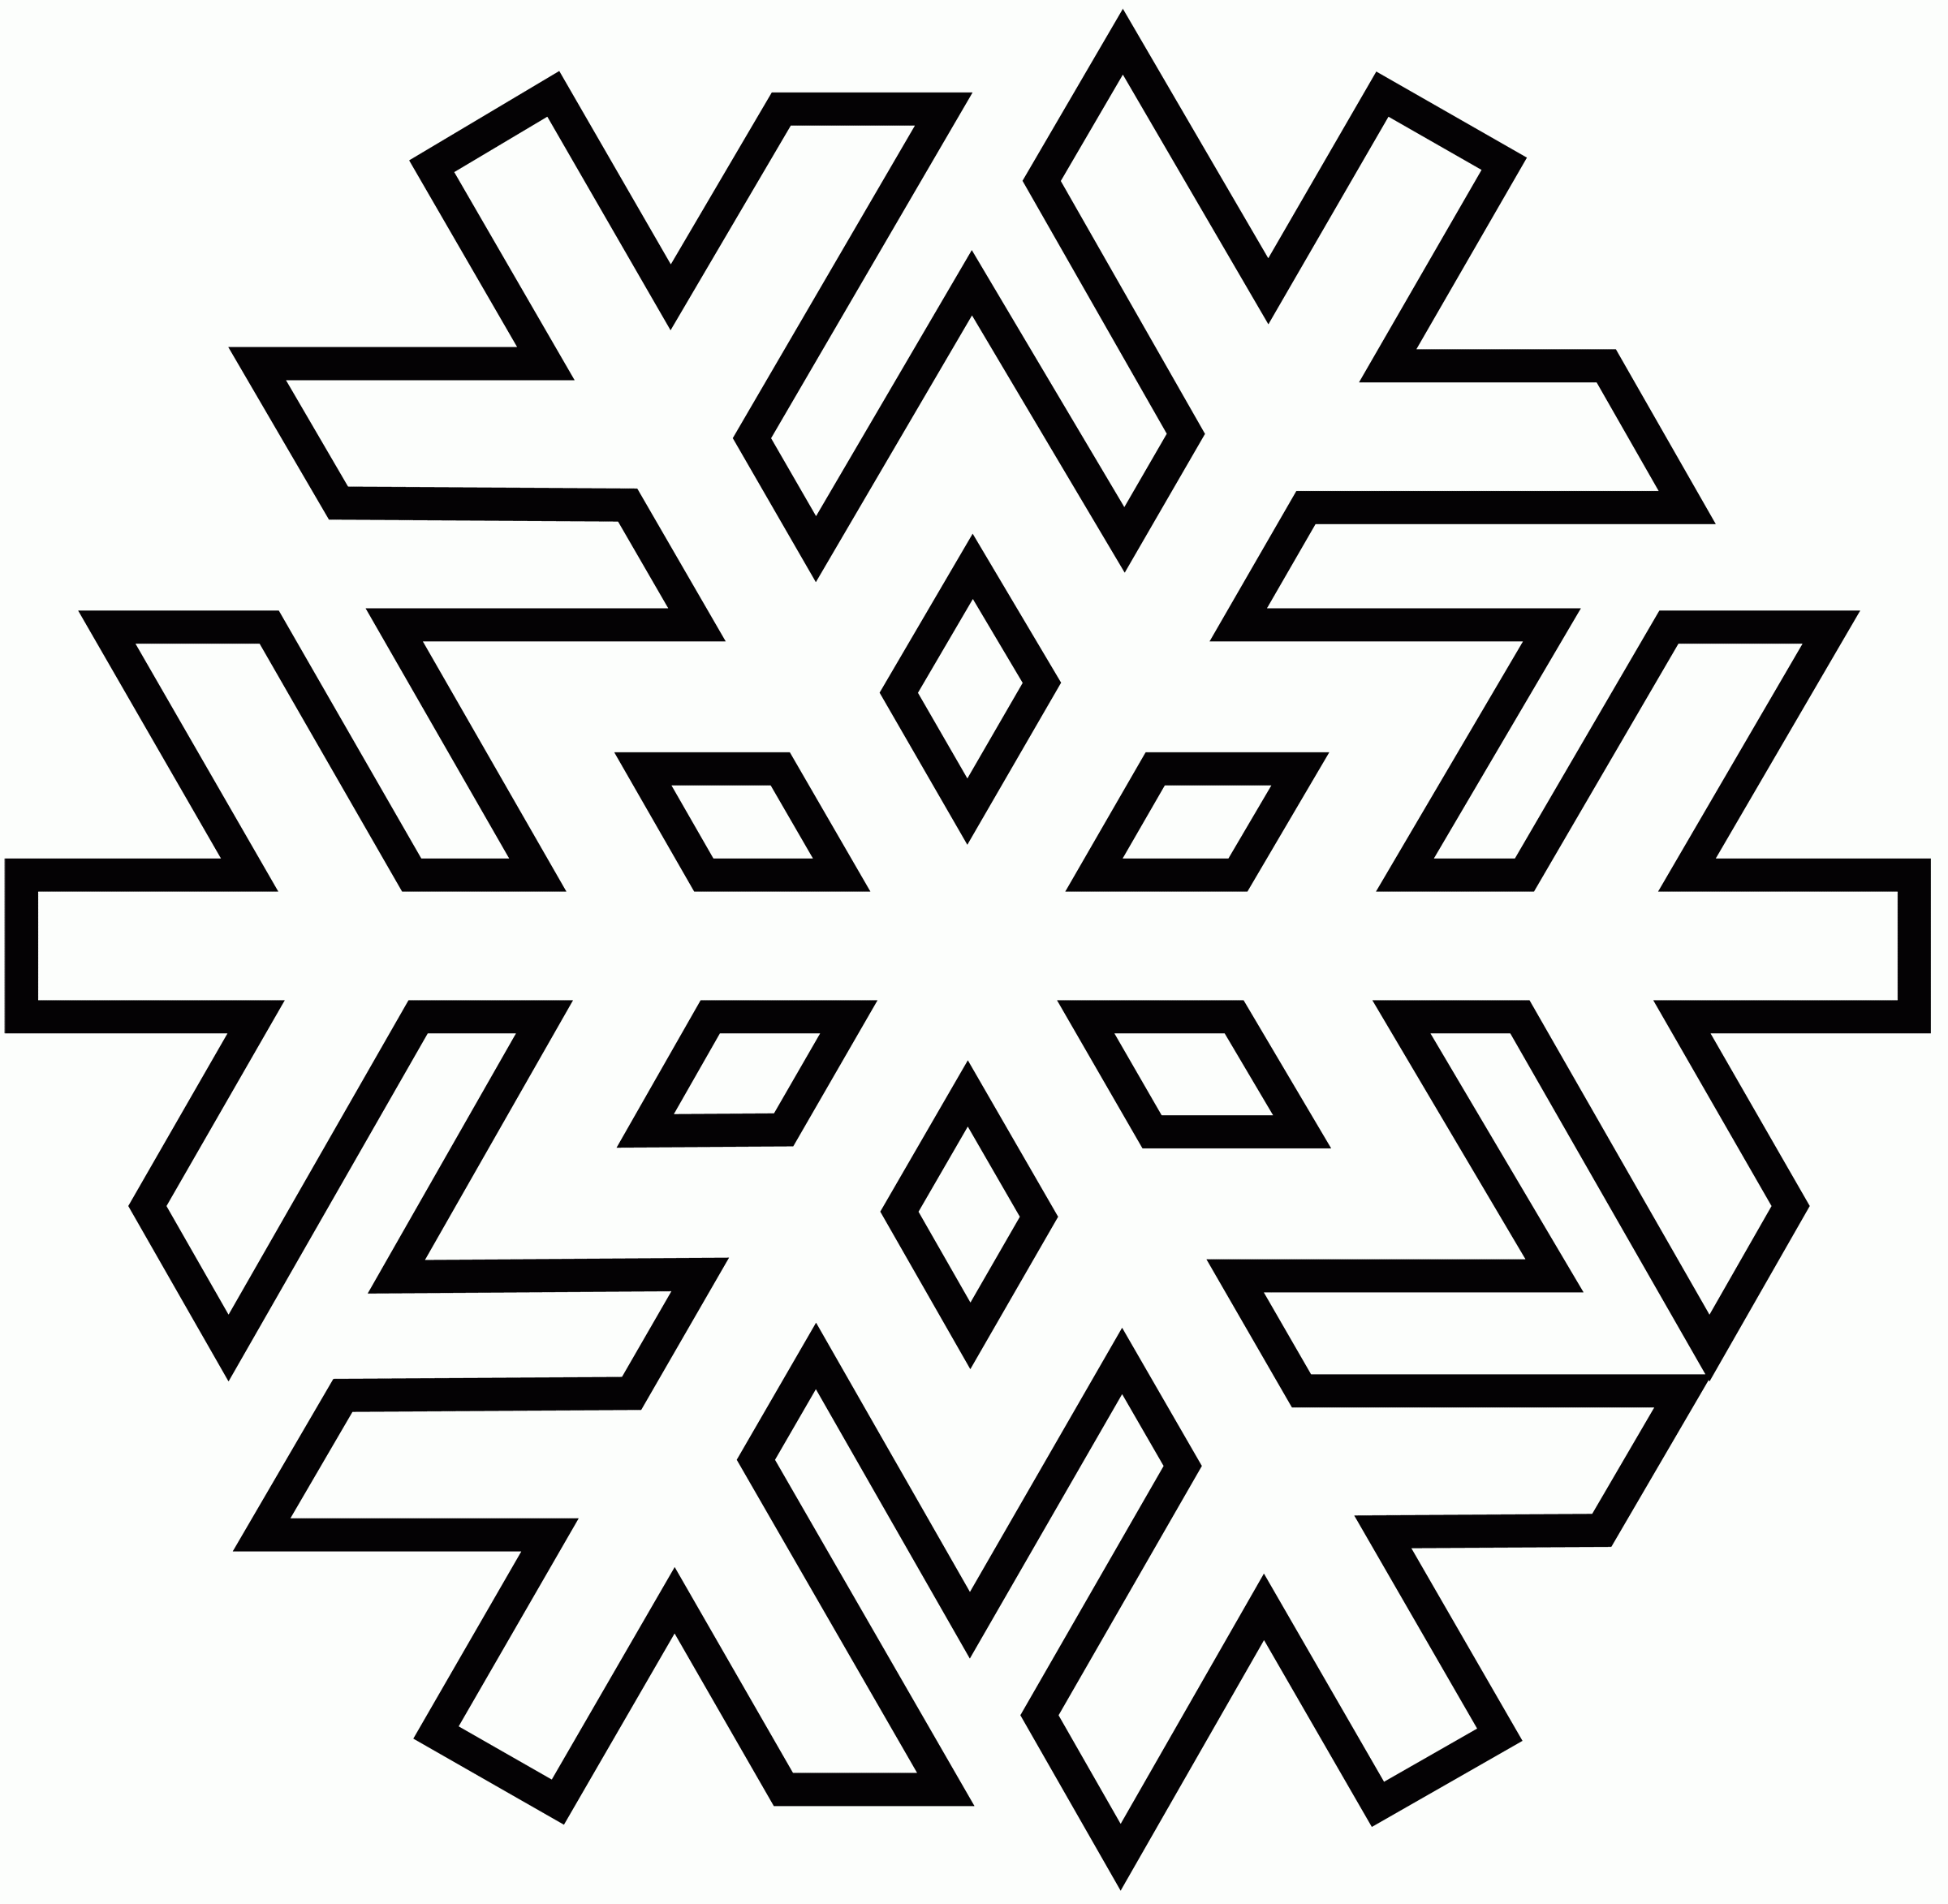 Snowflake Coloring Sheet - Coloring Pages for Kids and for Adults